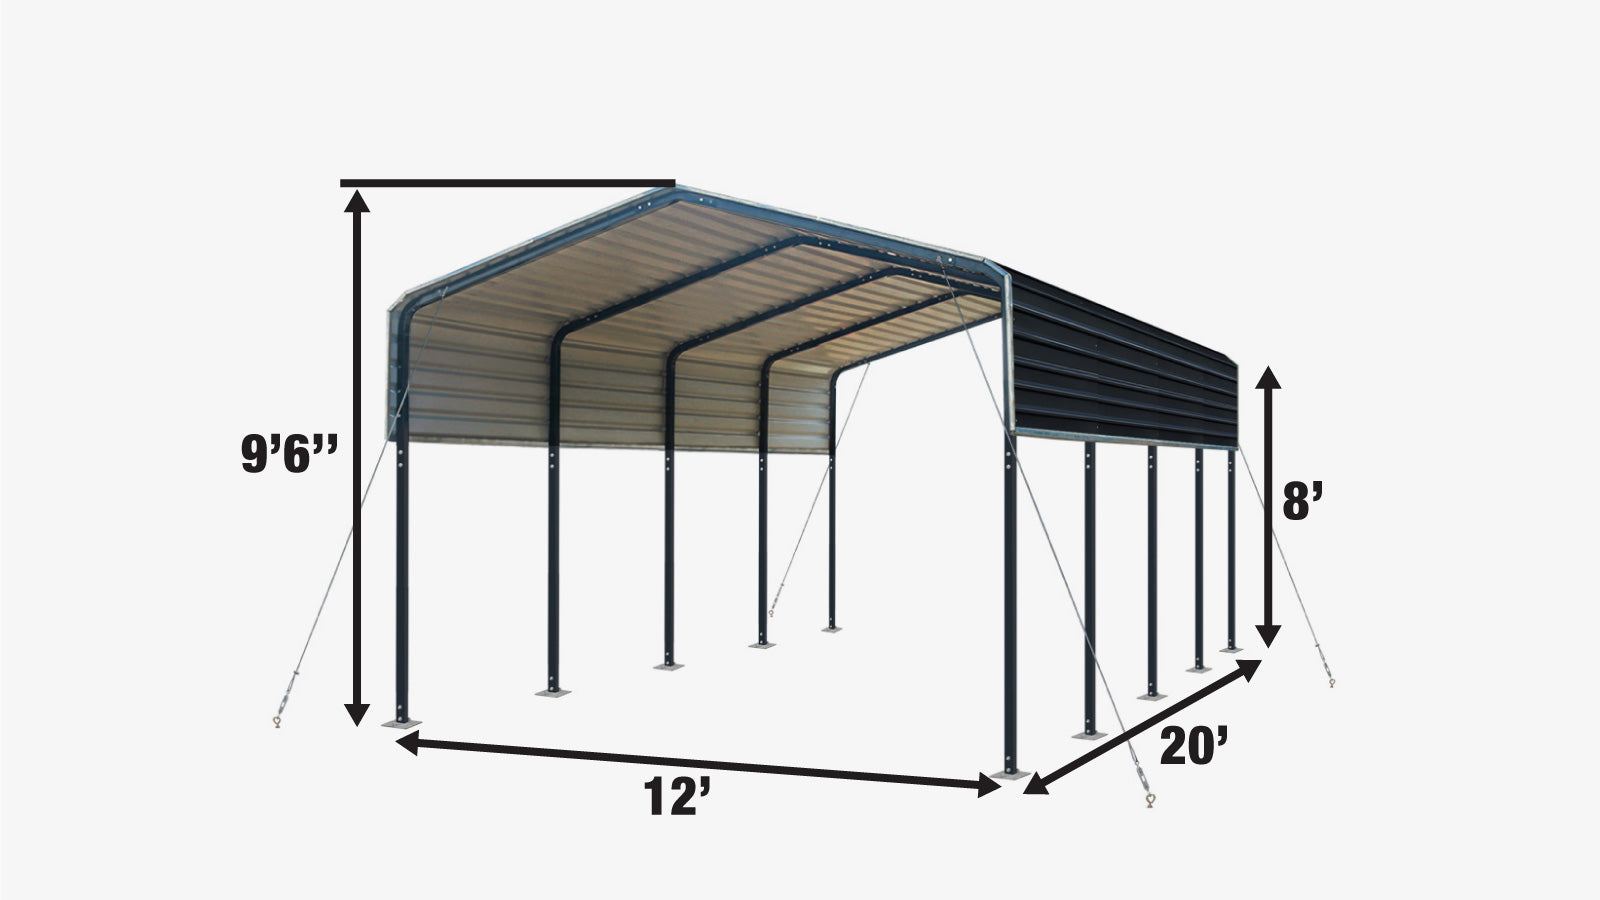 TMG Industrial 12’ x 20’ Metal Shed Carport with 8’ Open Sidewalls, TMG-MSC1220-specifications-image